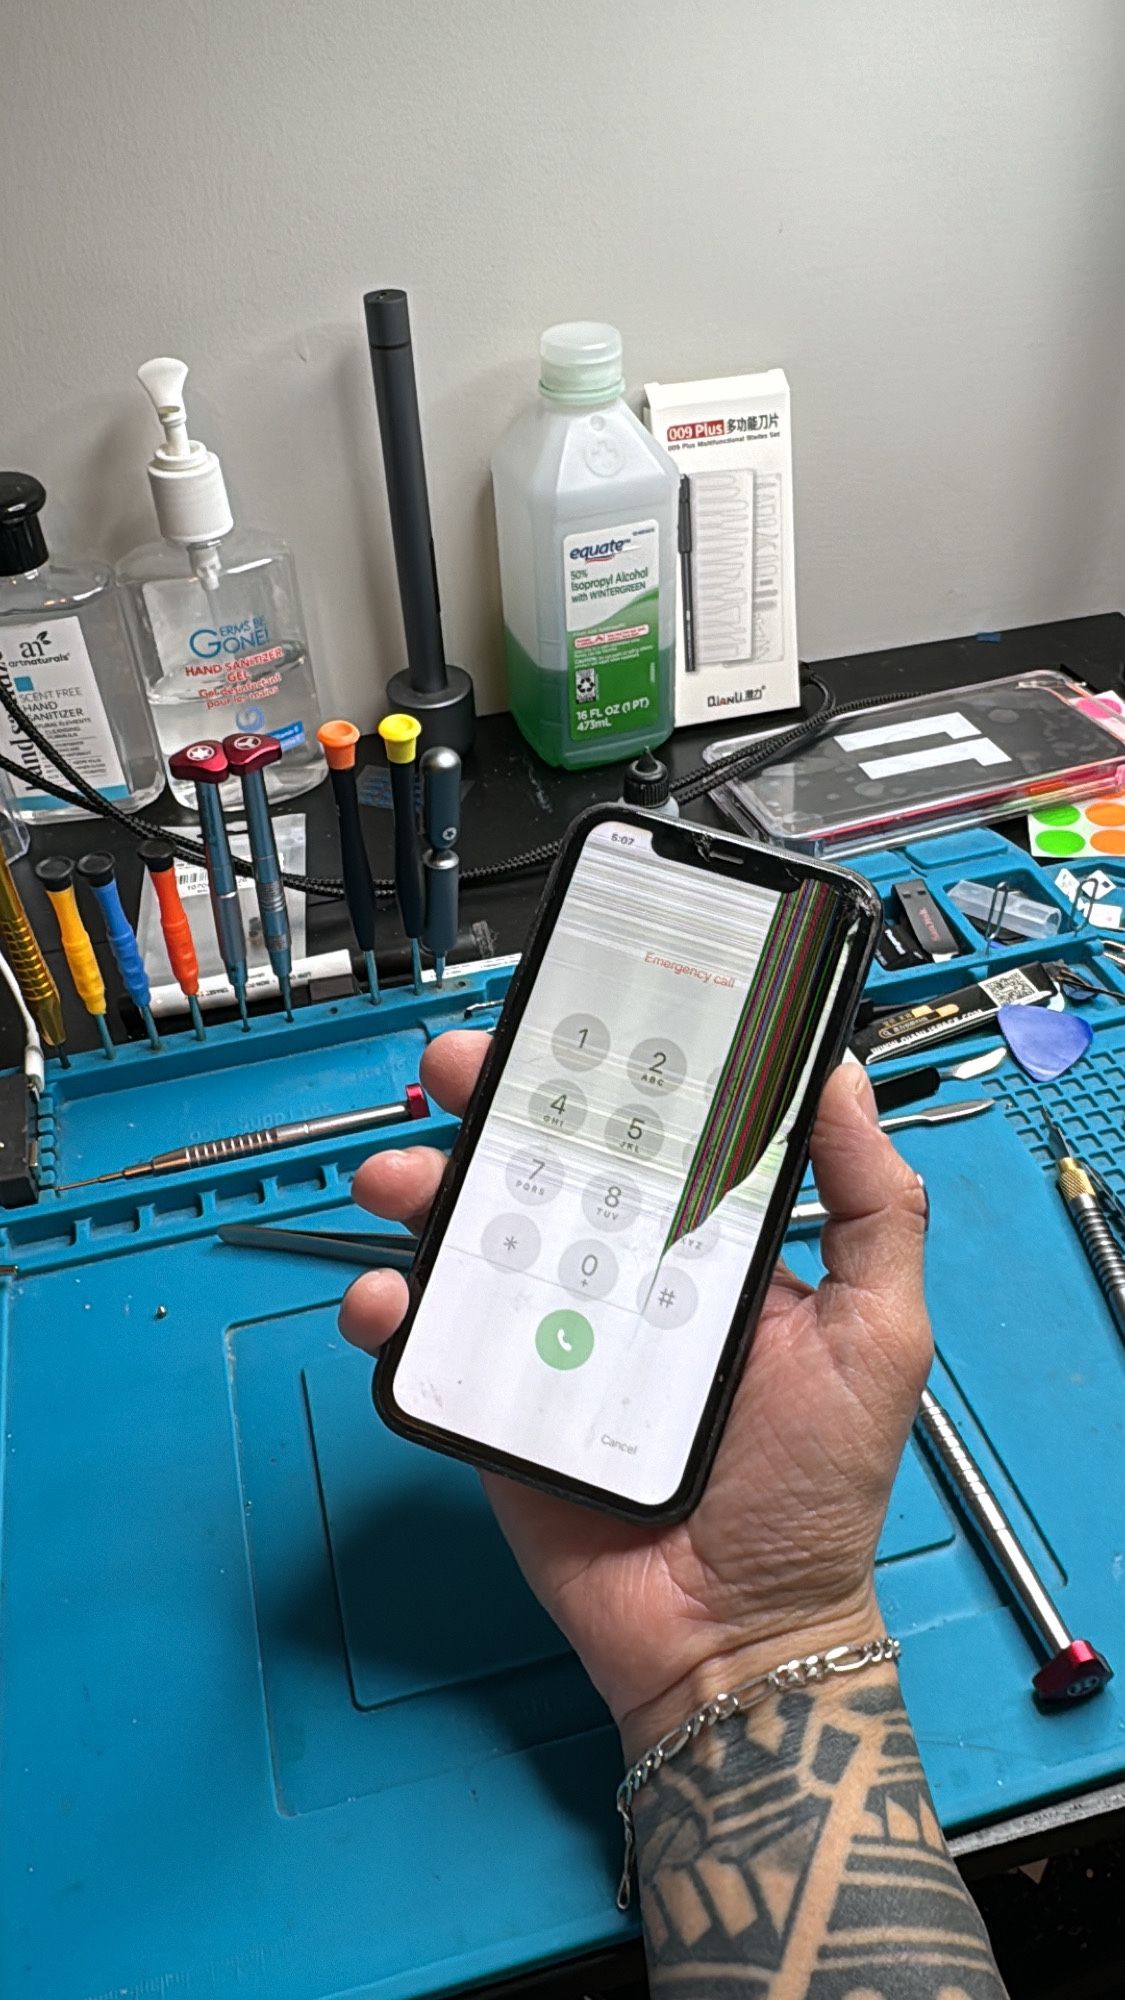 Iphone 11 Screen And Lcd Replacement $55